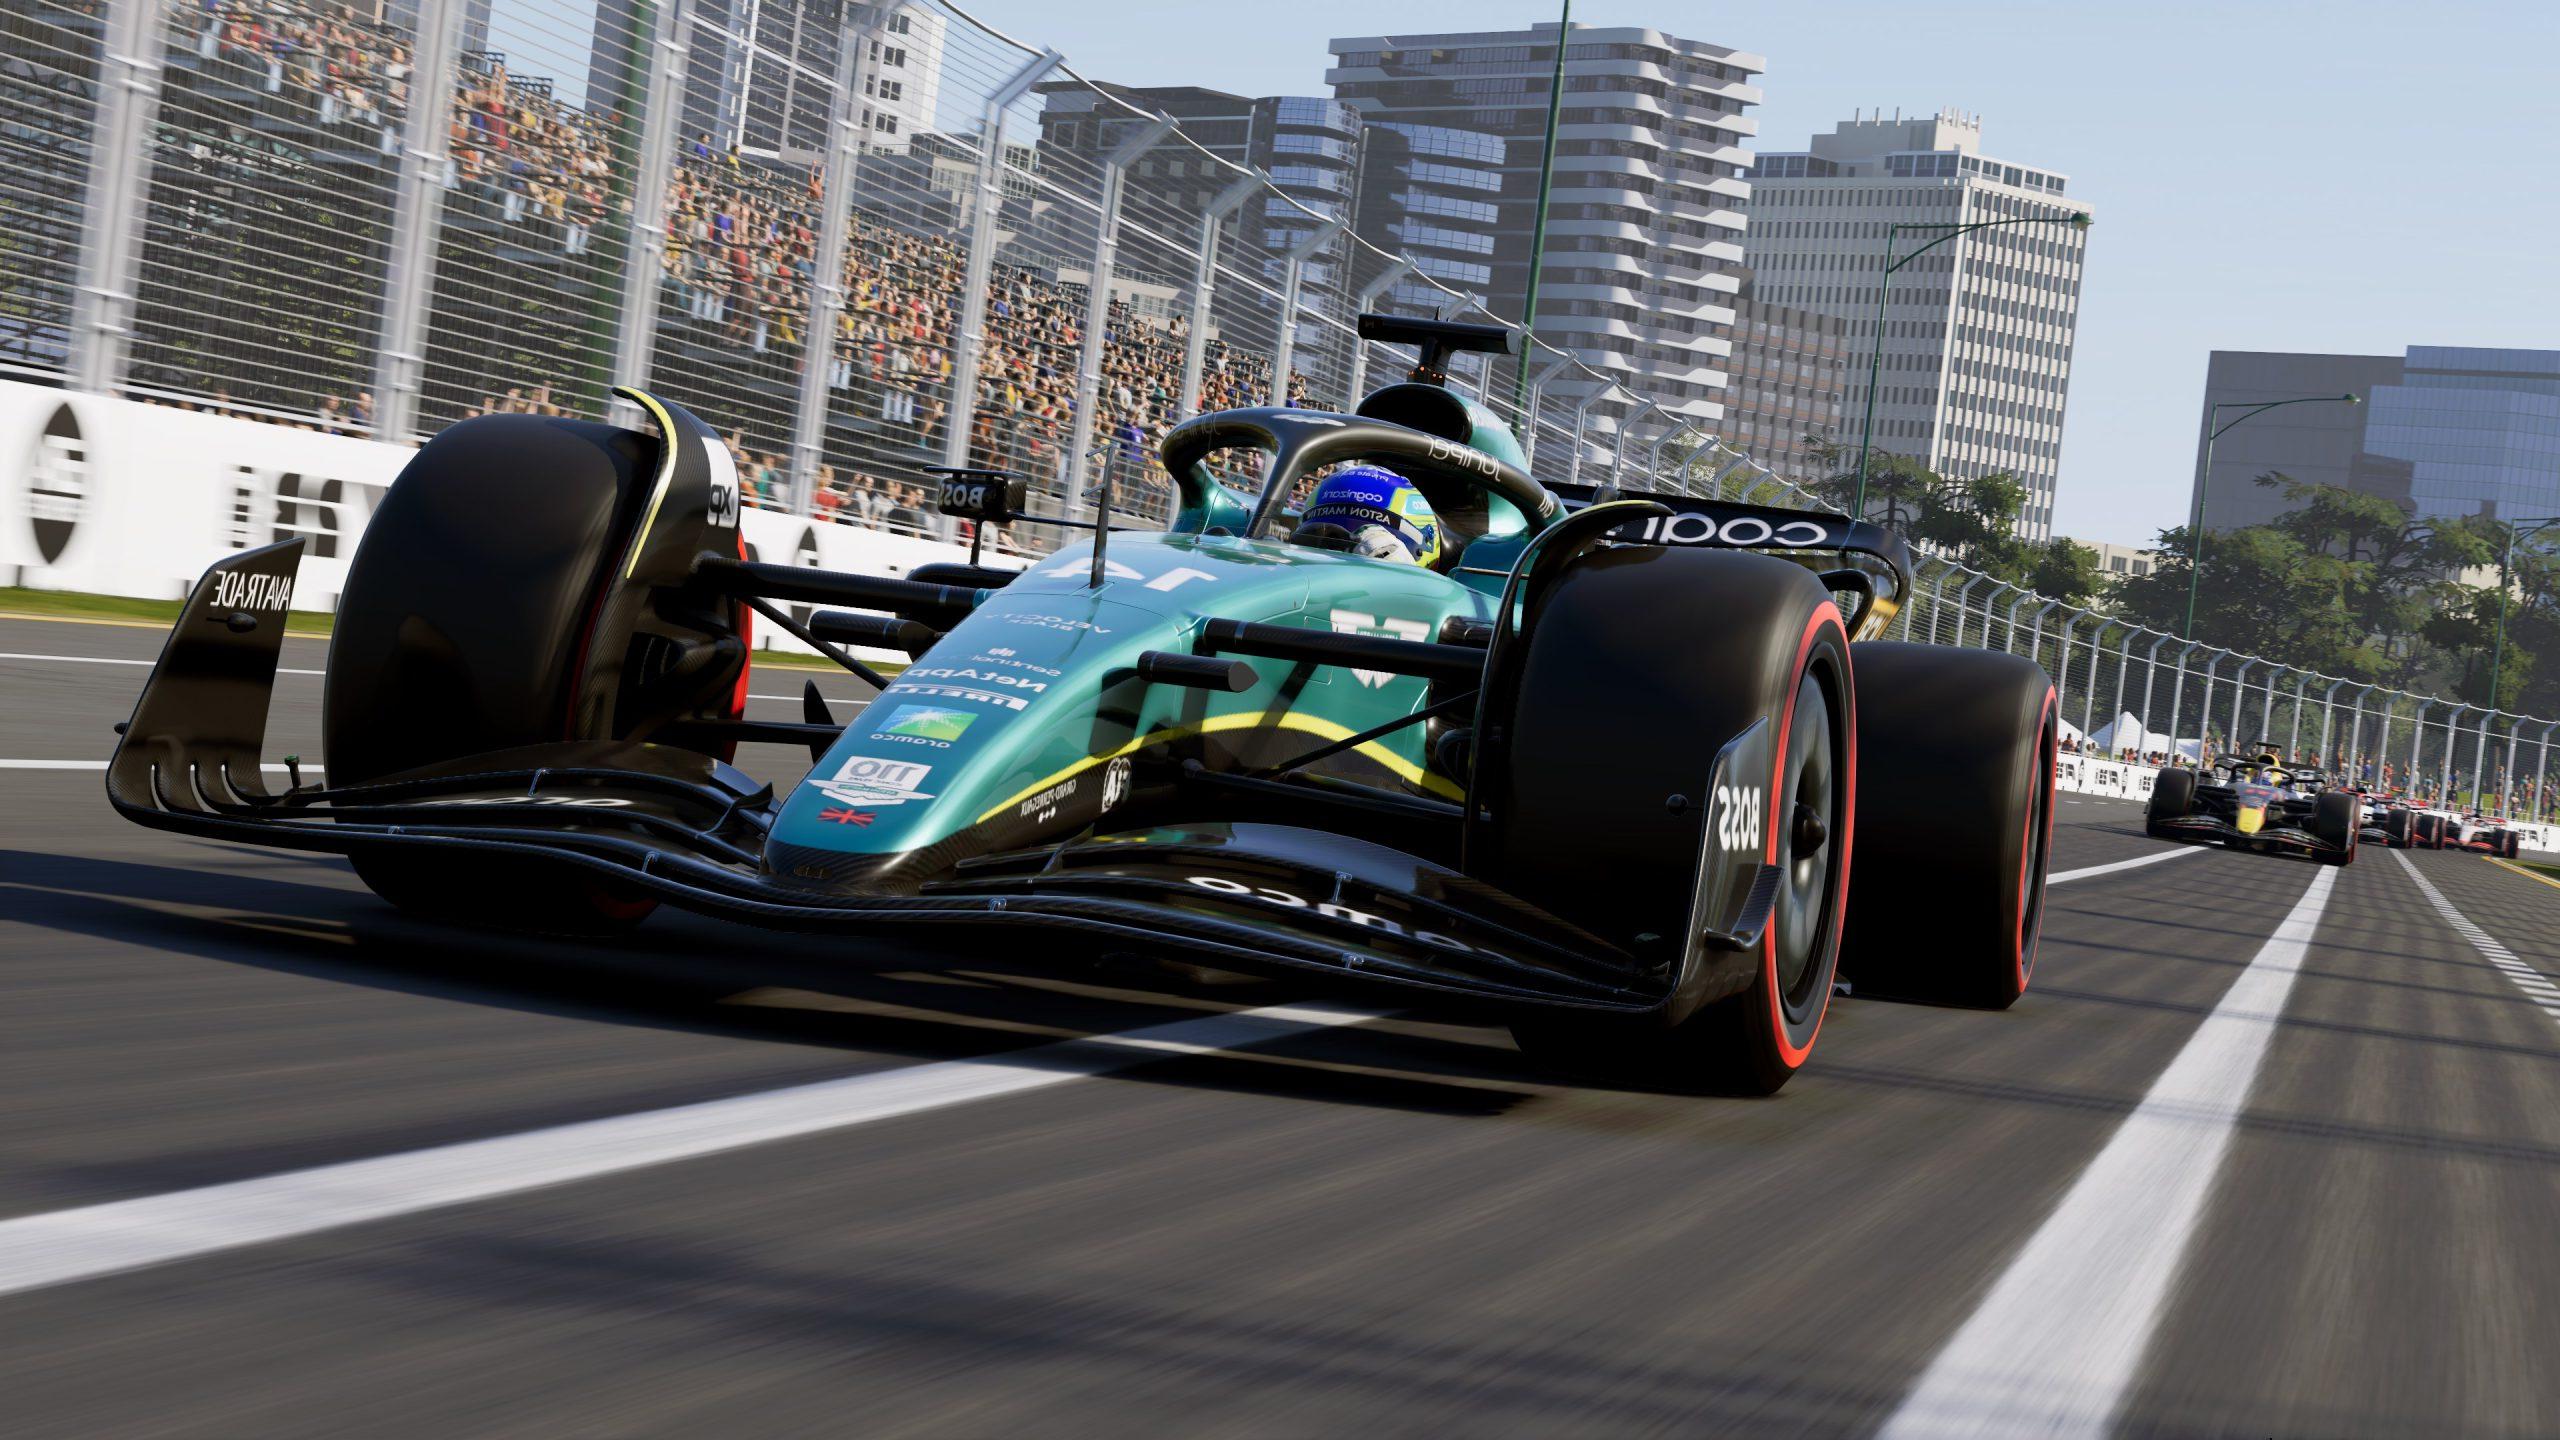 Take the F1 23-player approach to the competition